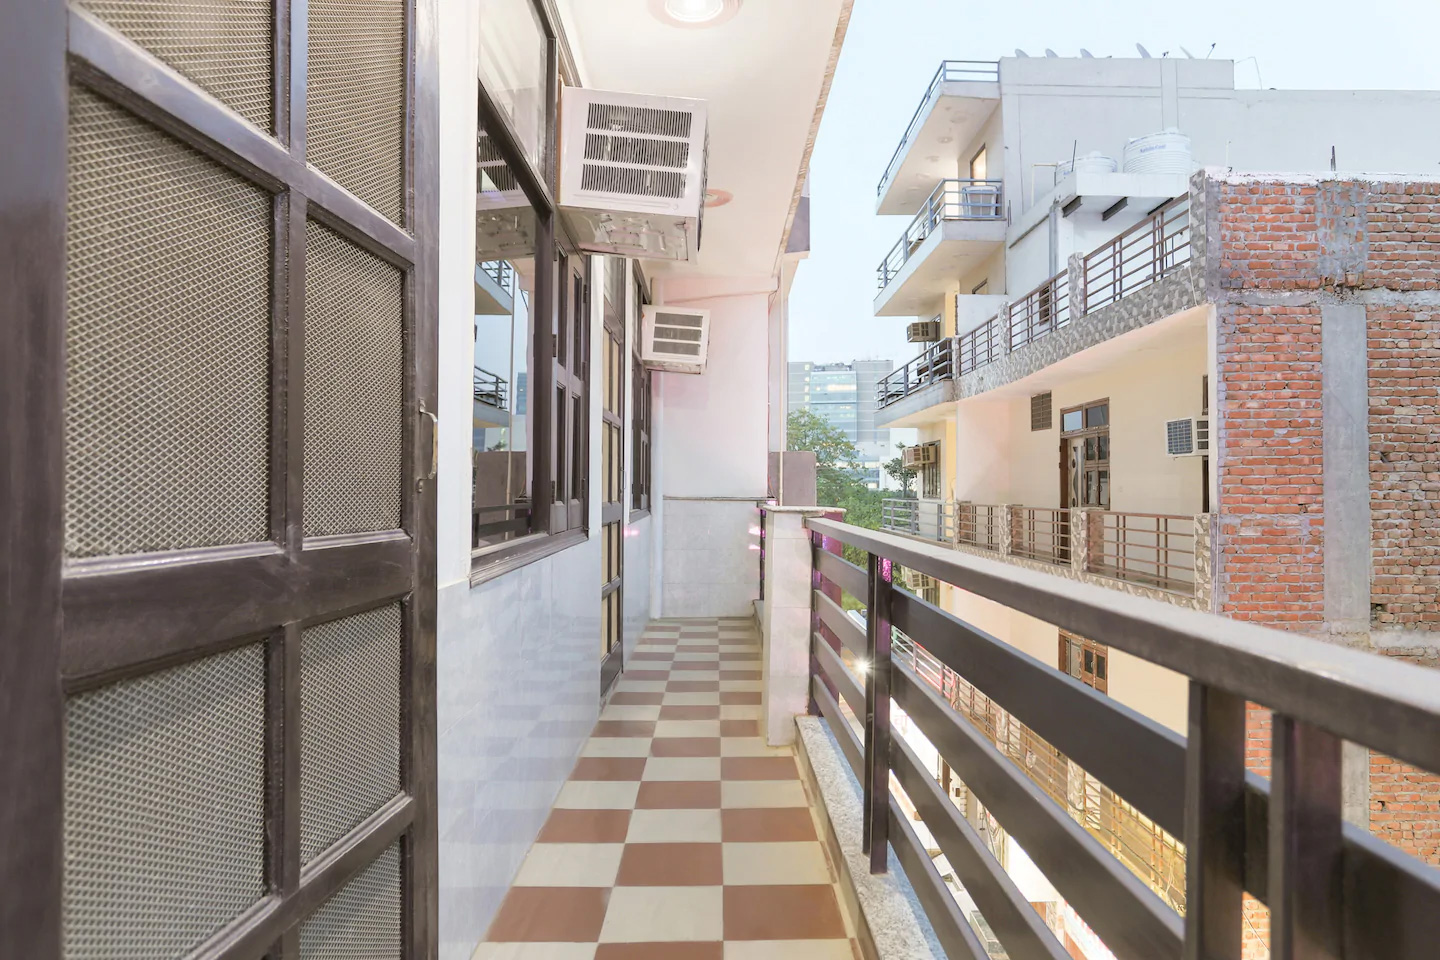 Guest house in Gurgaon, guest house near medanta medicity, Budget guest house in Gurgaon Delhi NCR, cheap guest house in Gurgaon